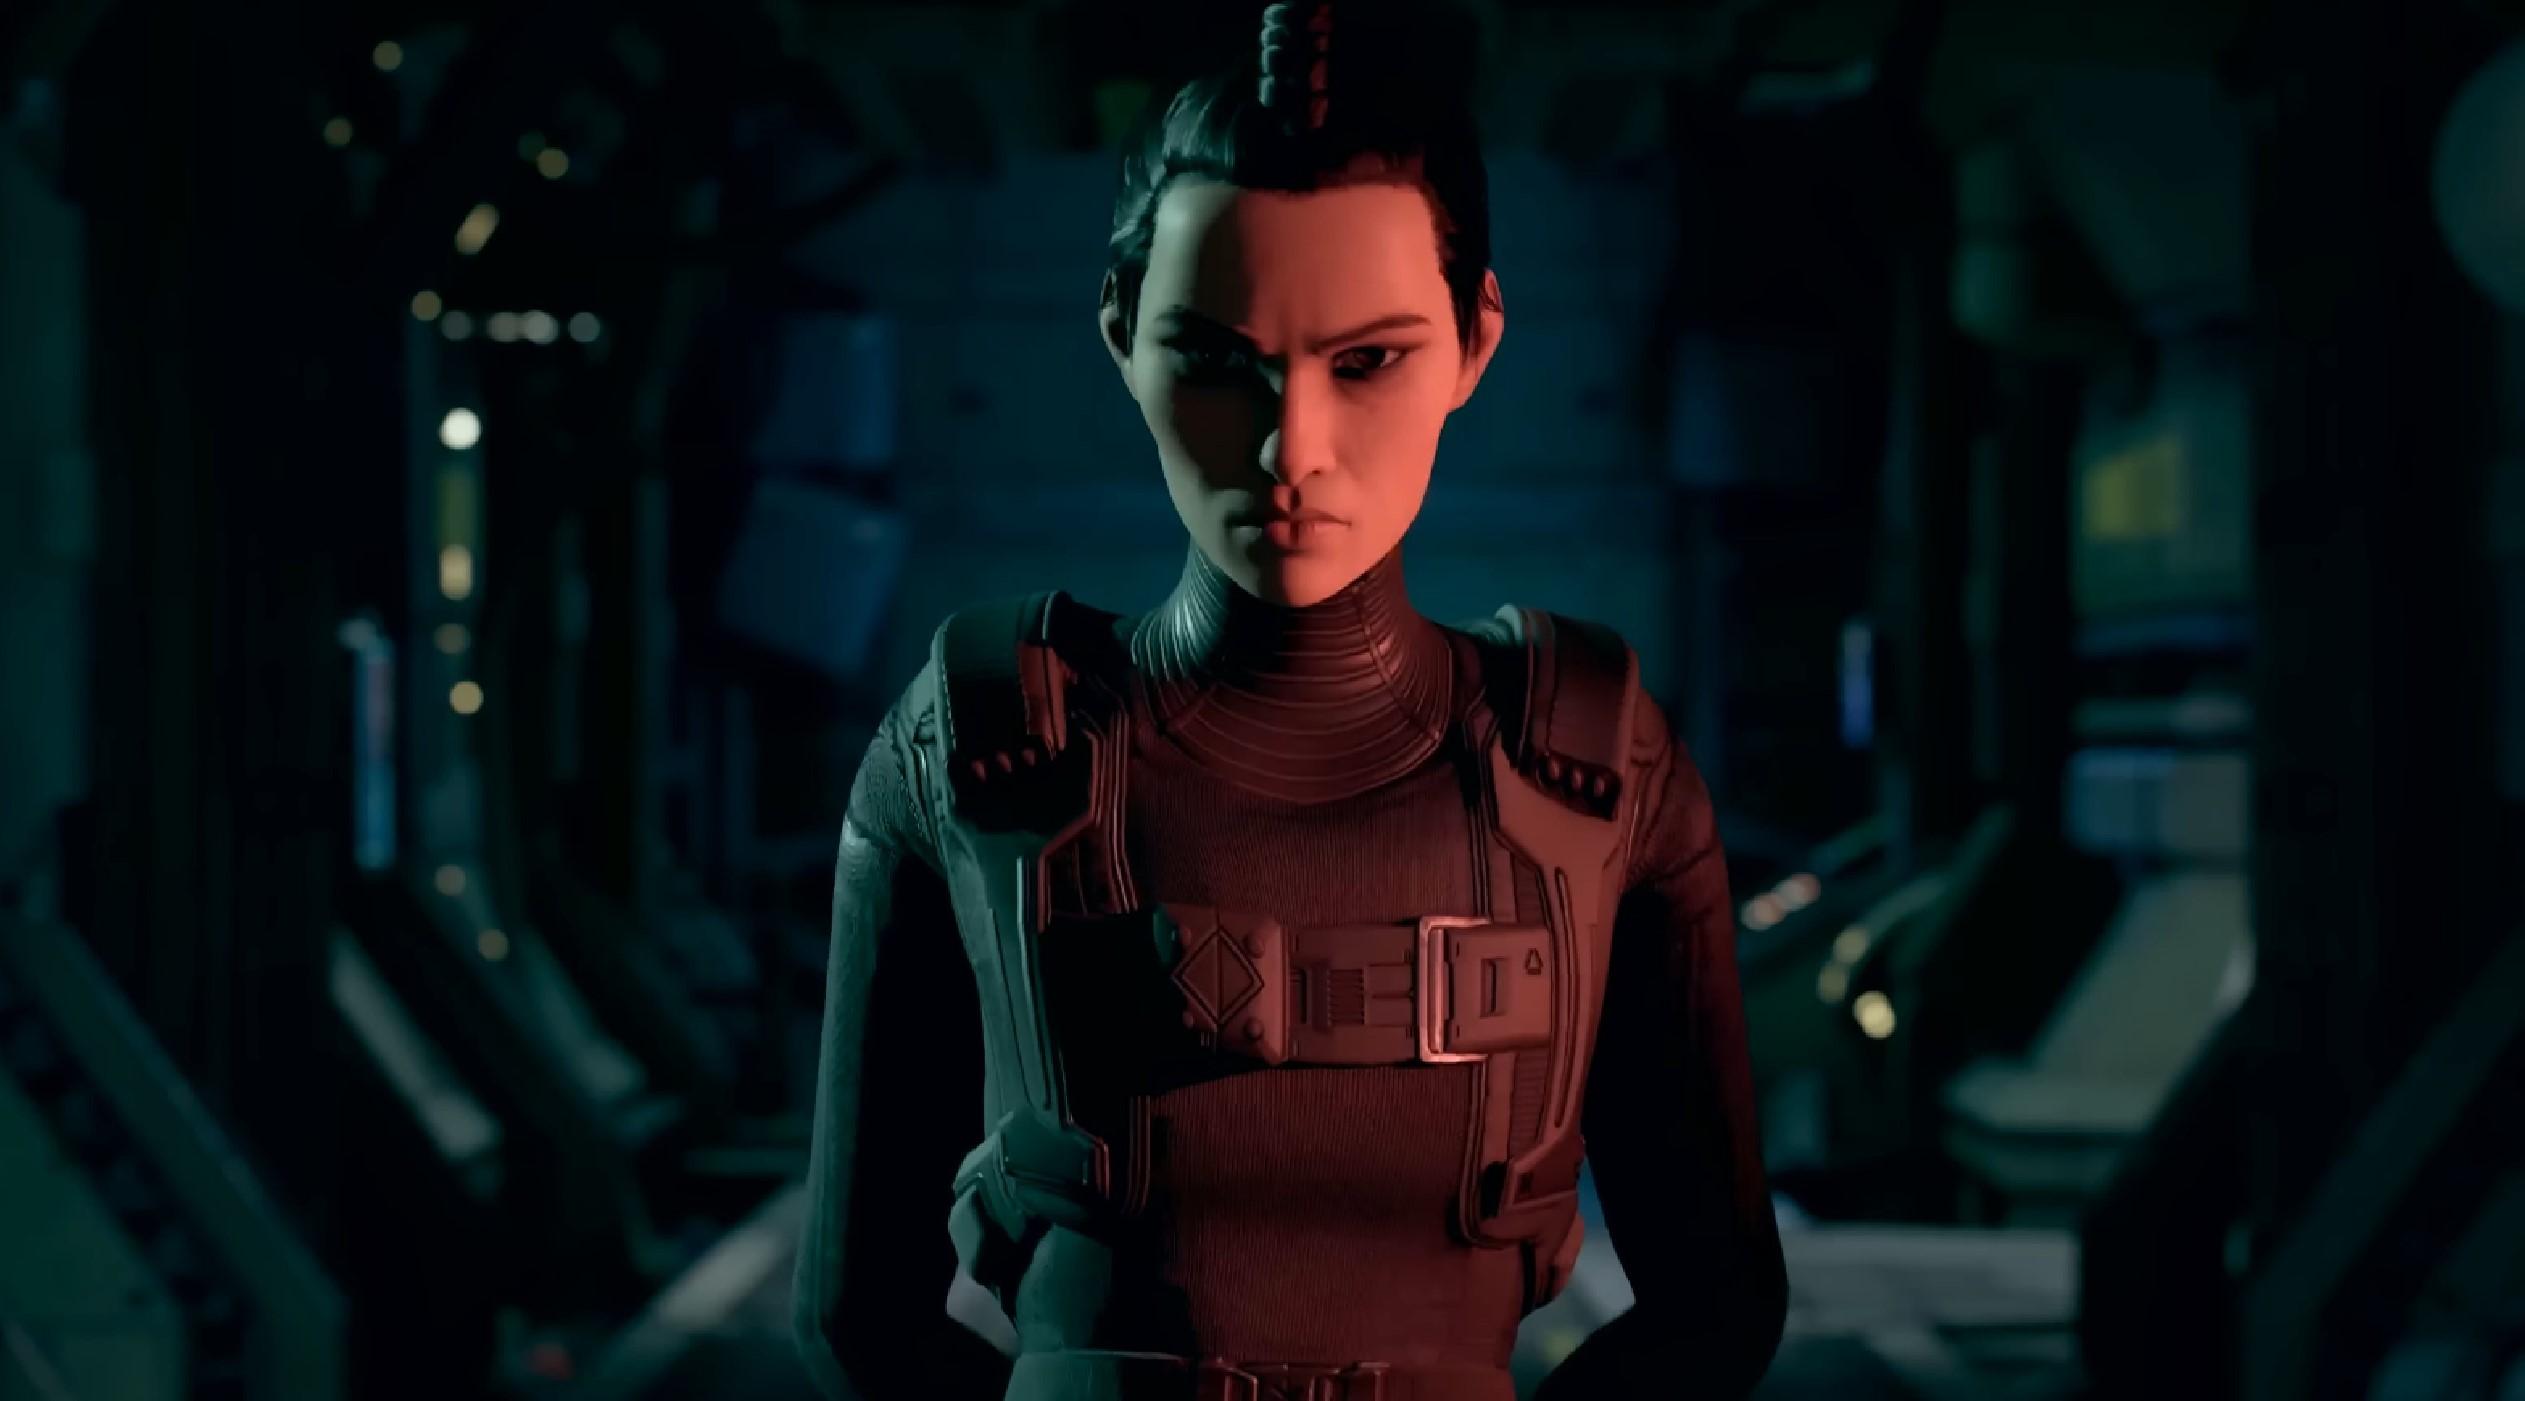 The Expanse: A Telltale Series Has Set A Release Date For Its Premiere  Episode